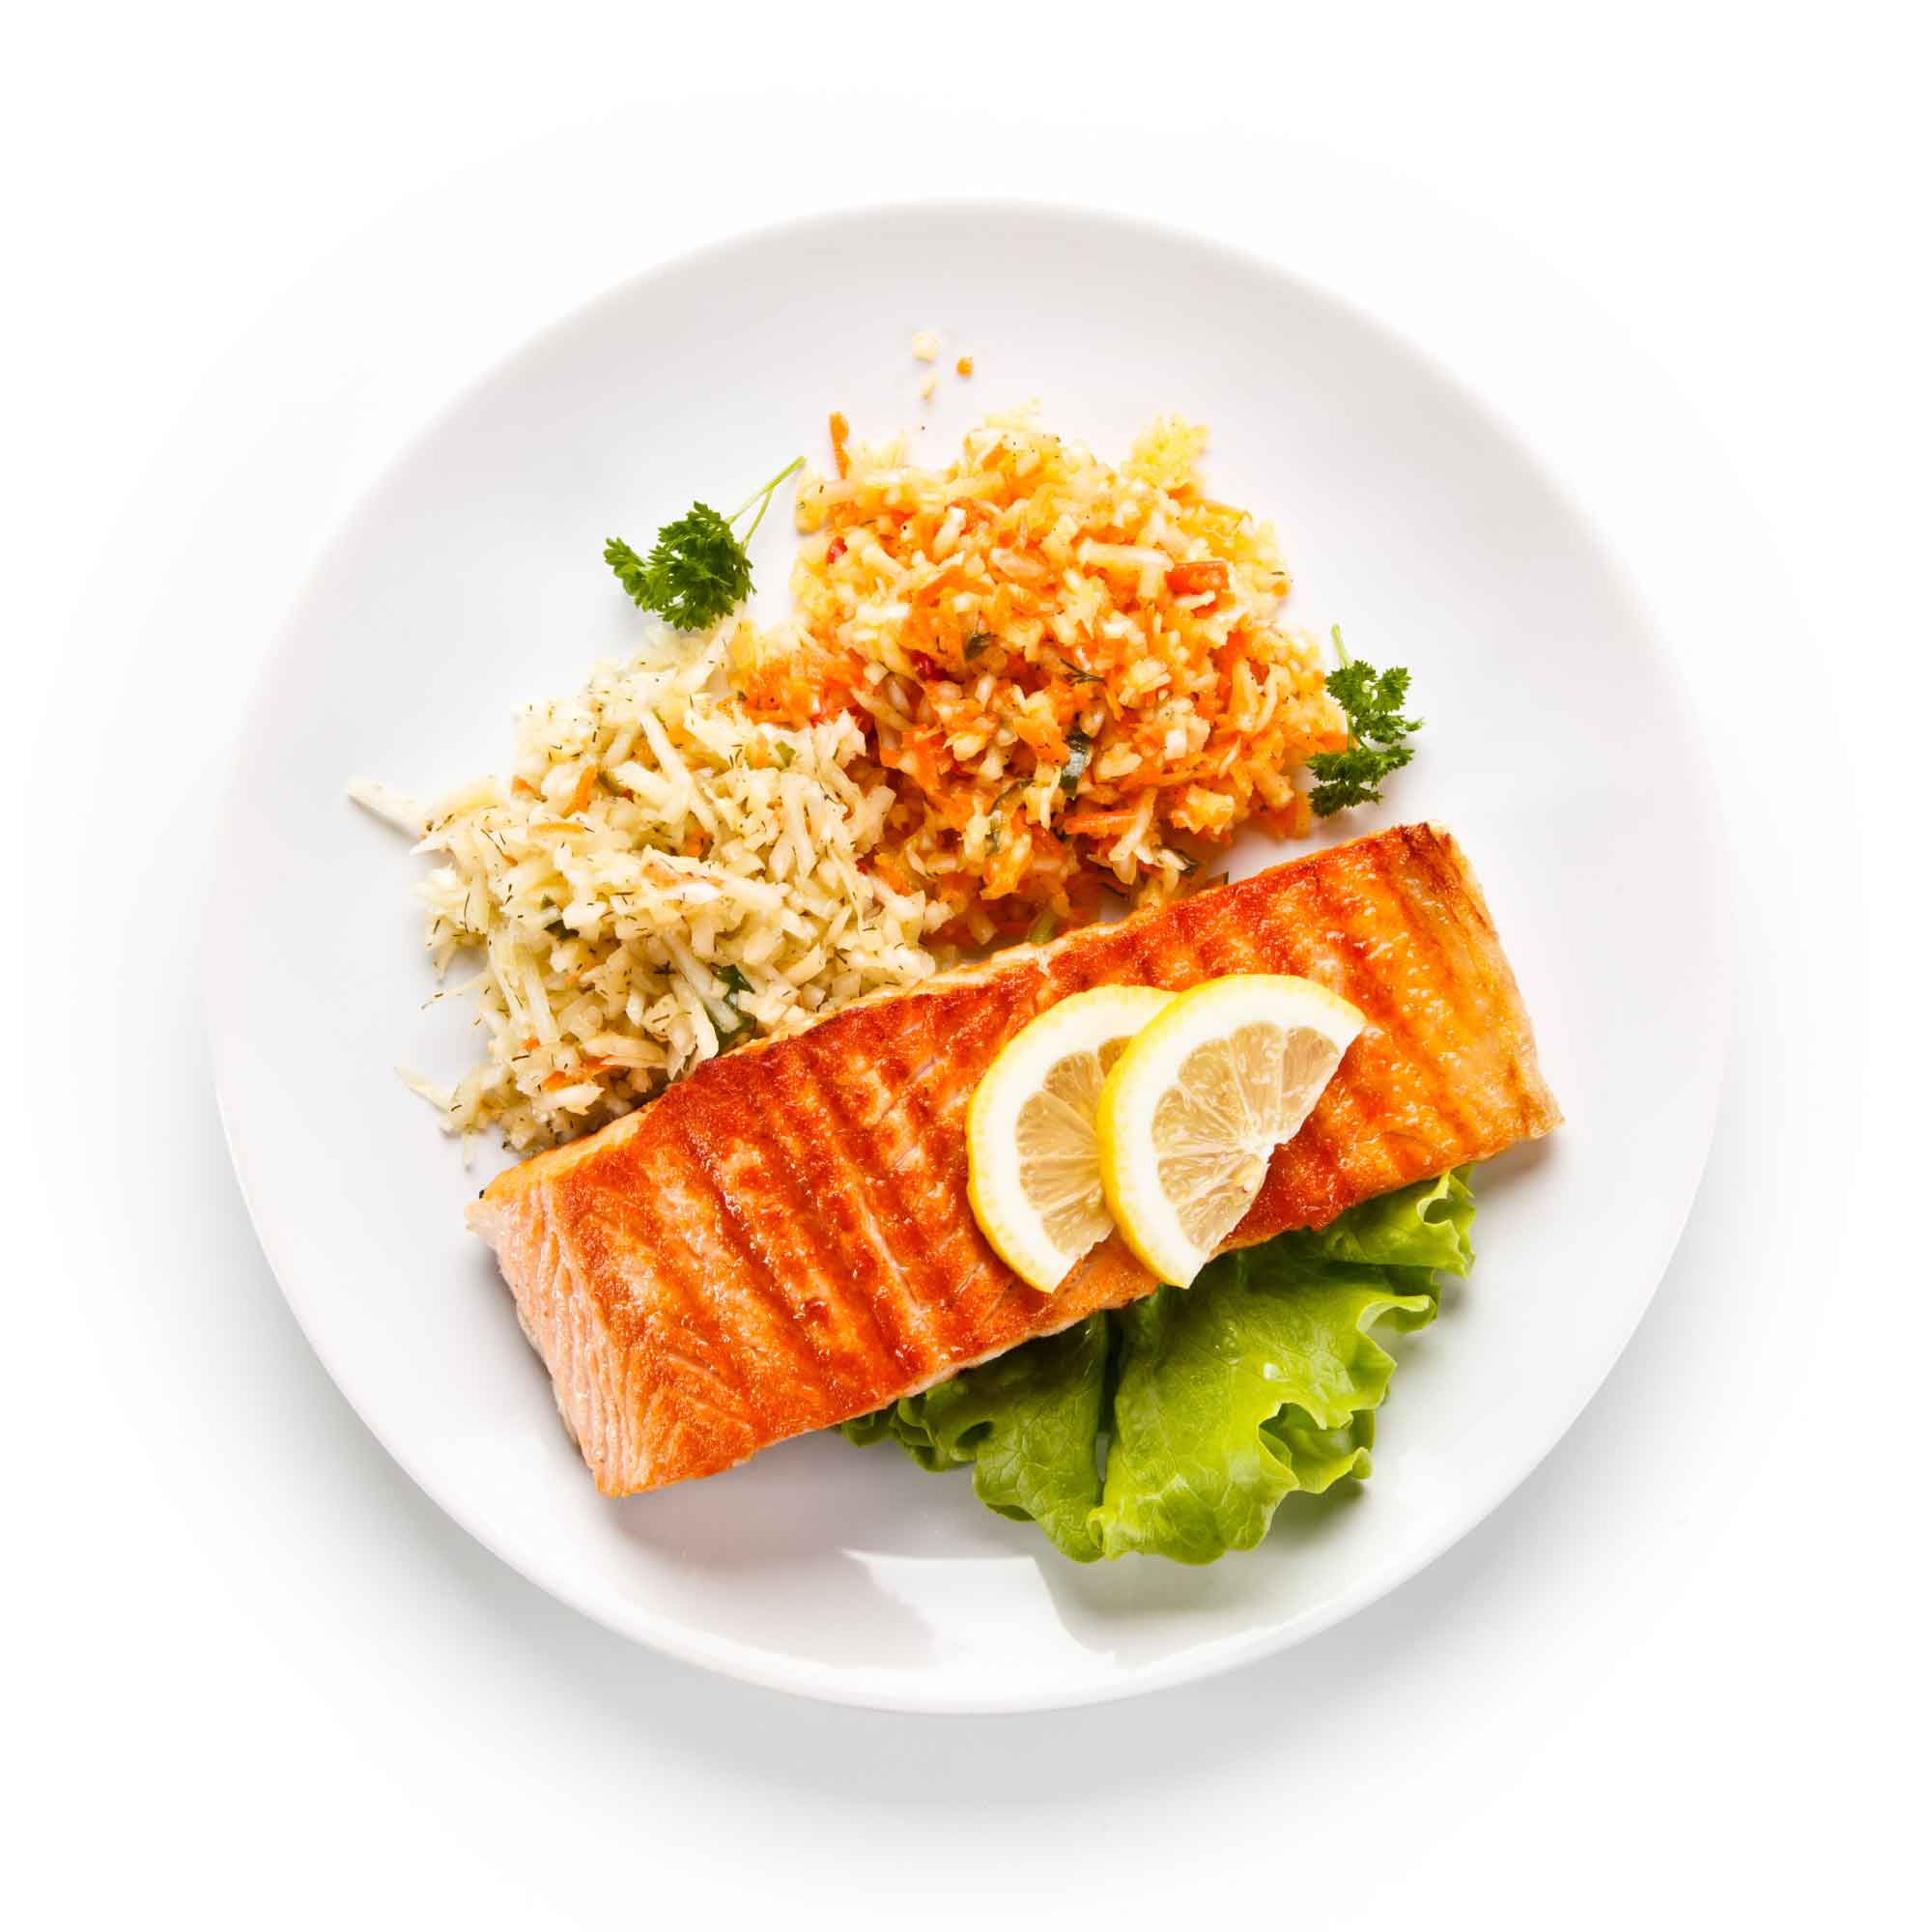 Grilled salmon on a bed of lettuce and rice